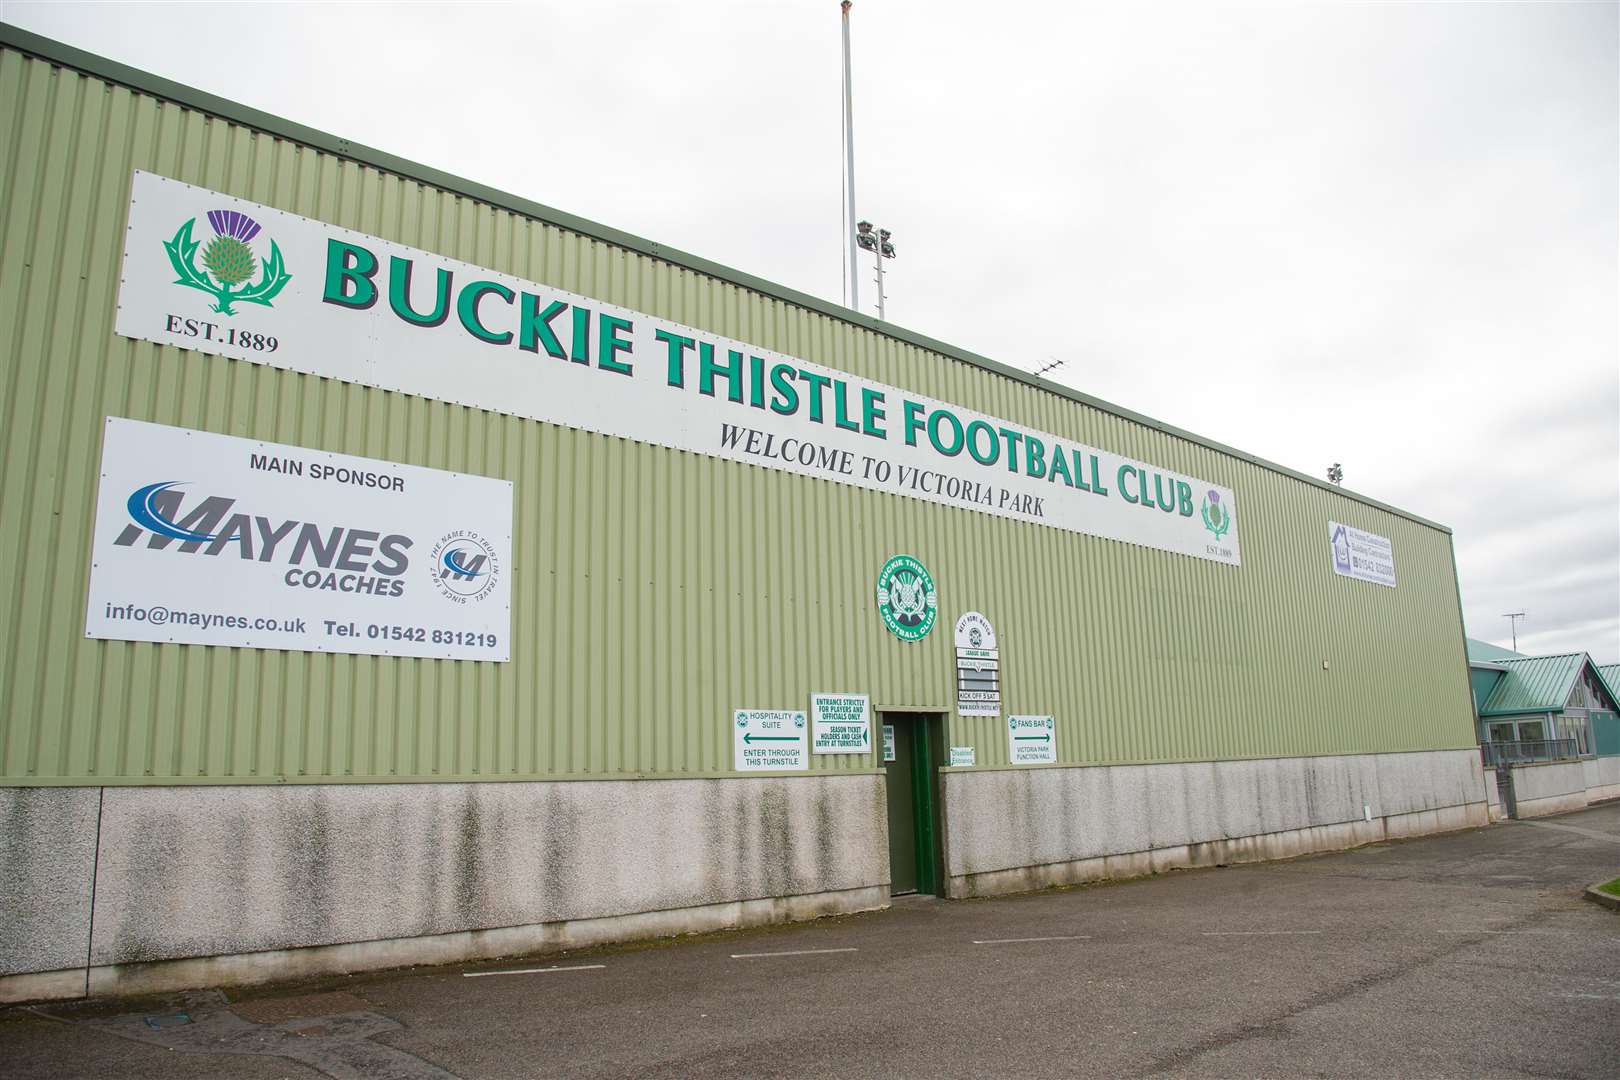 Victoria Park, the home of Buckie Thistle FC and the venue for tomorrow night's meeting. Picture: Daniel Forsyth.